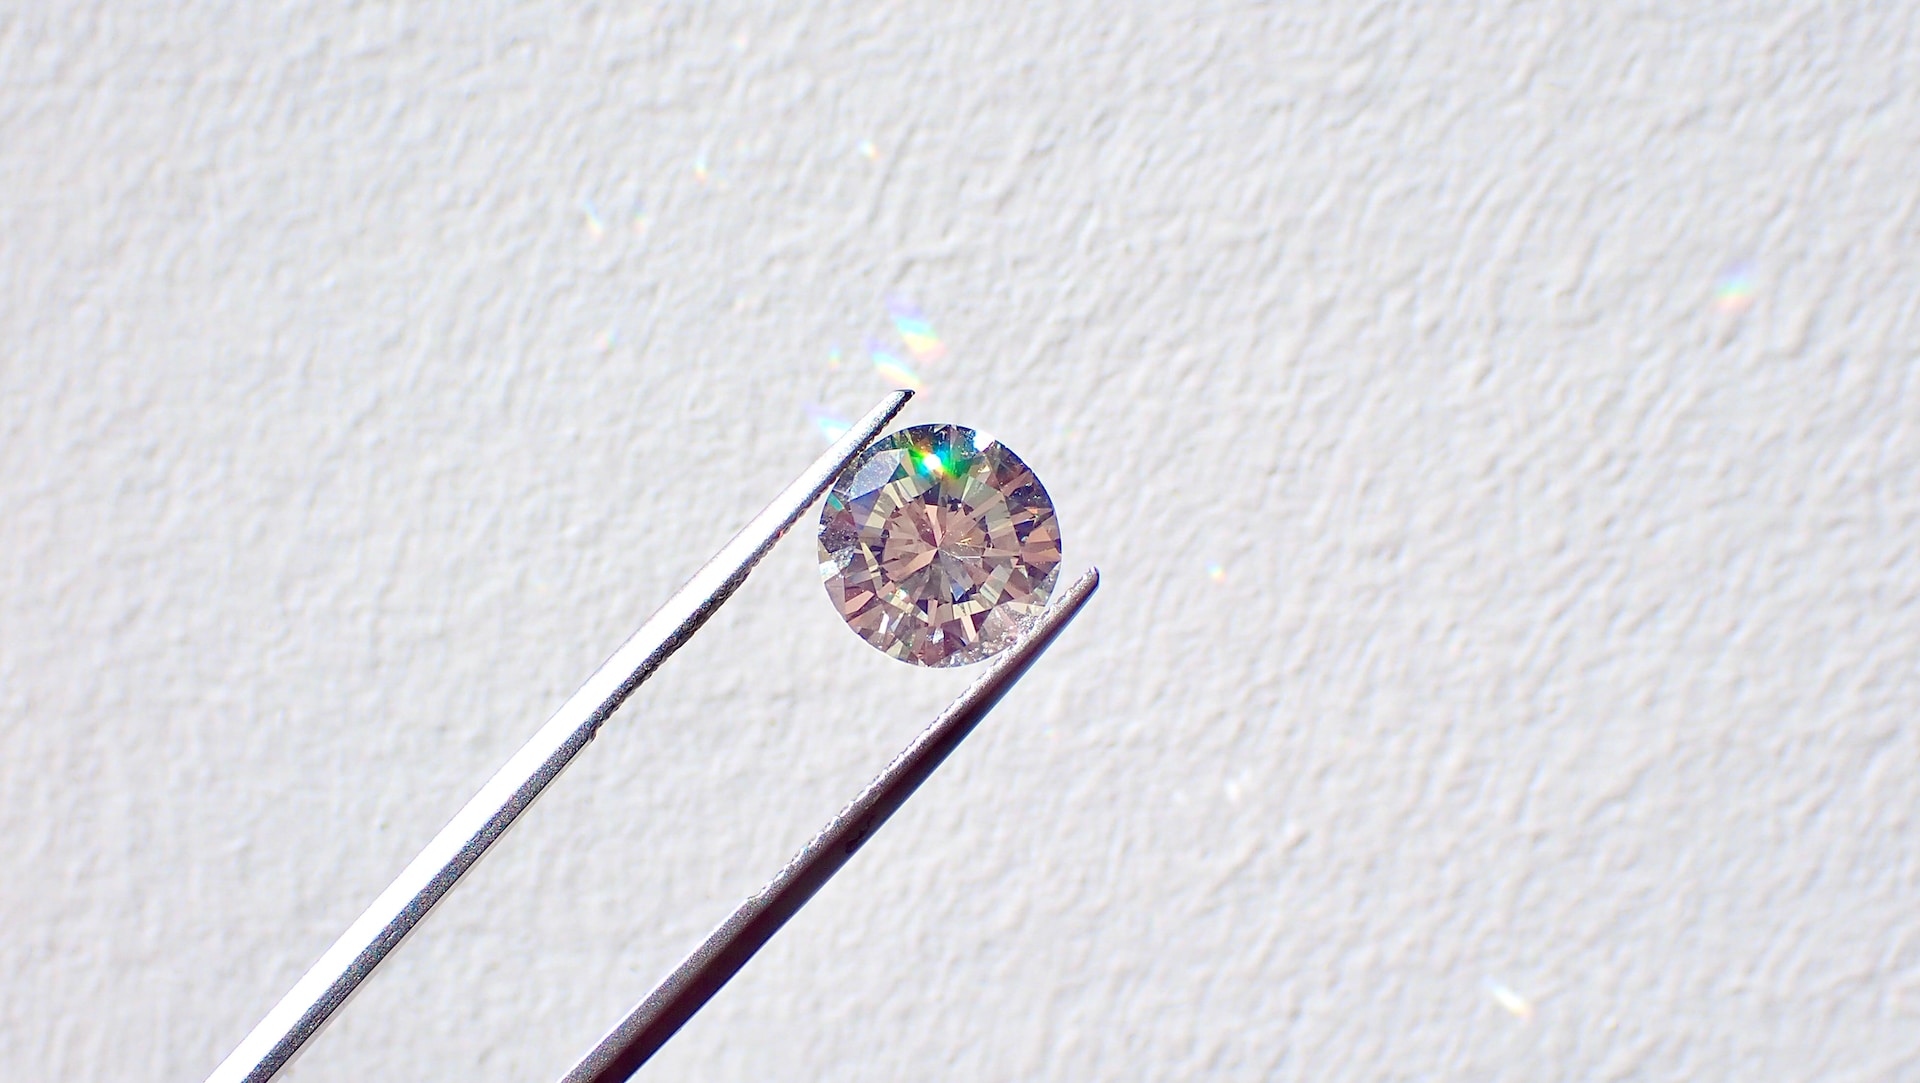 close up image of a round cut diamond held between a pair of tweezers against a white background